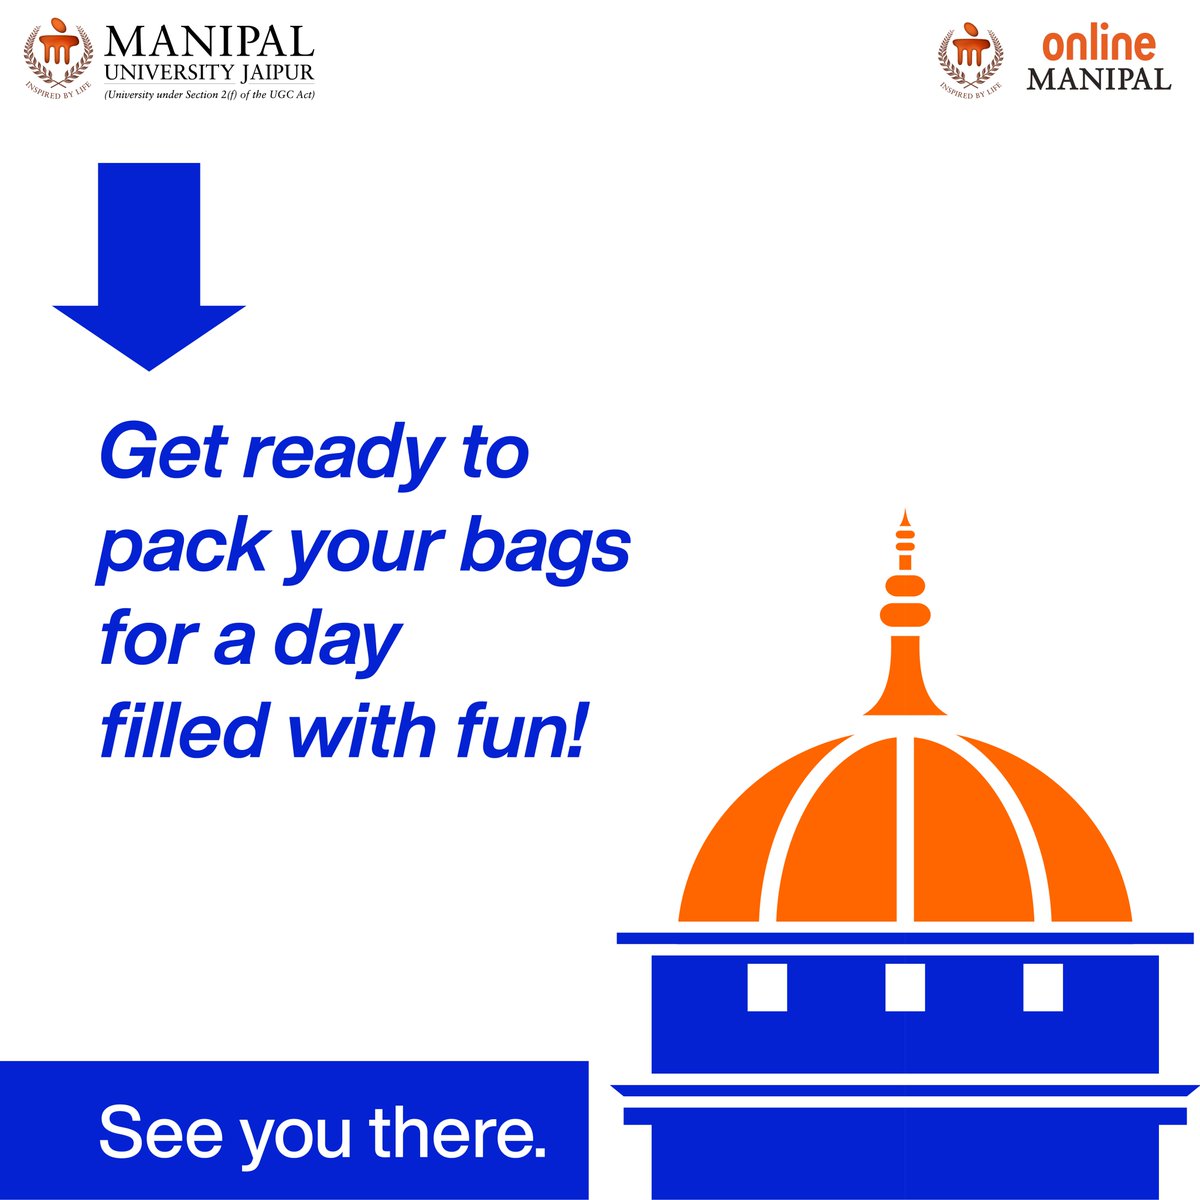 Get ready for the most awaited online learners’ meet-up!

EKAM 2024 is back and better than ever! Pack your bags to visit the Manipal University Jaipur campus for a full day of Fun.

#EKAM2024 #EKAM #ManipalUniversityJaipur #MeetandGreet #MUJ #OnlineLearnersMeetup #OnlineManipal